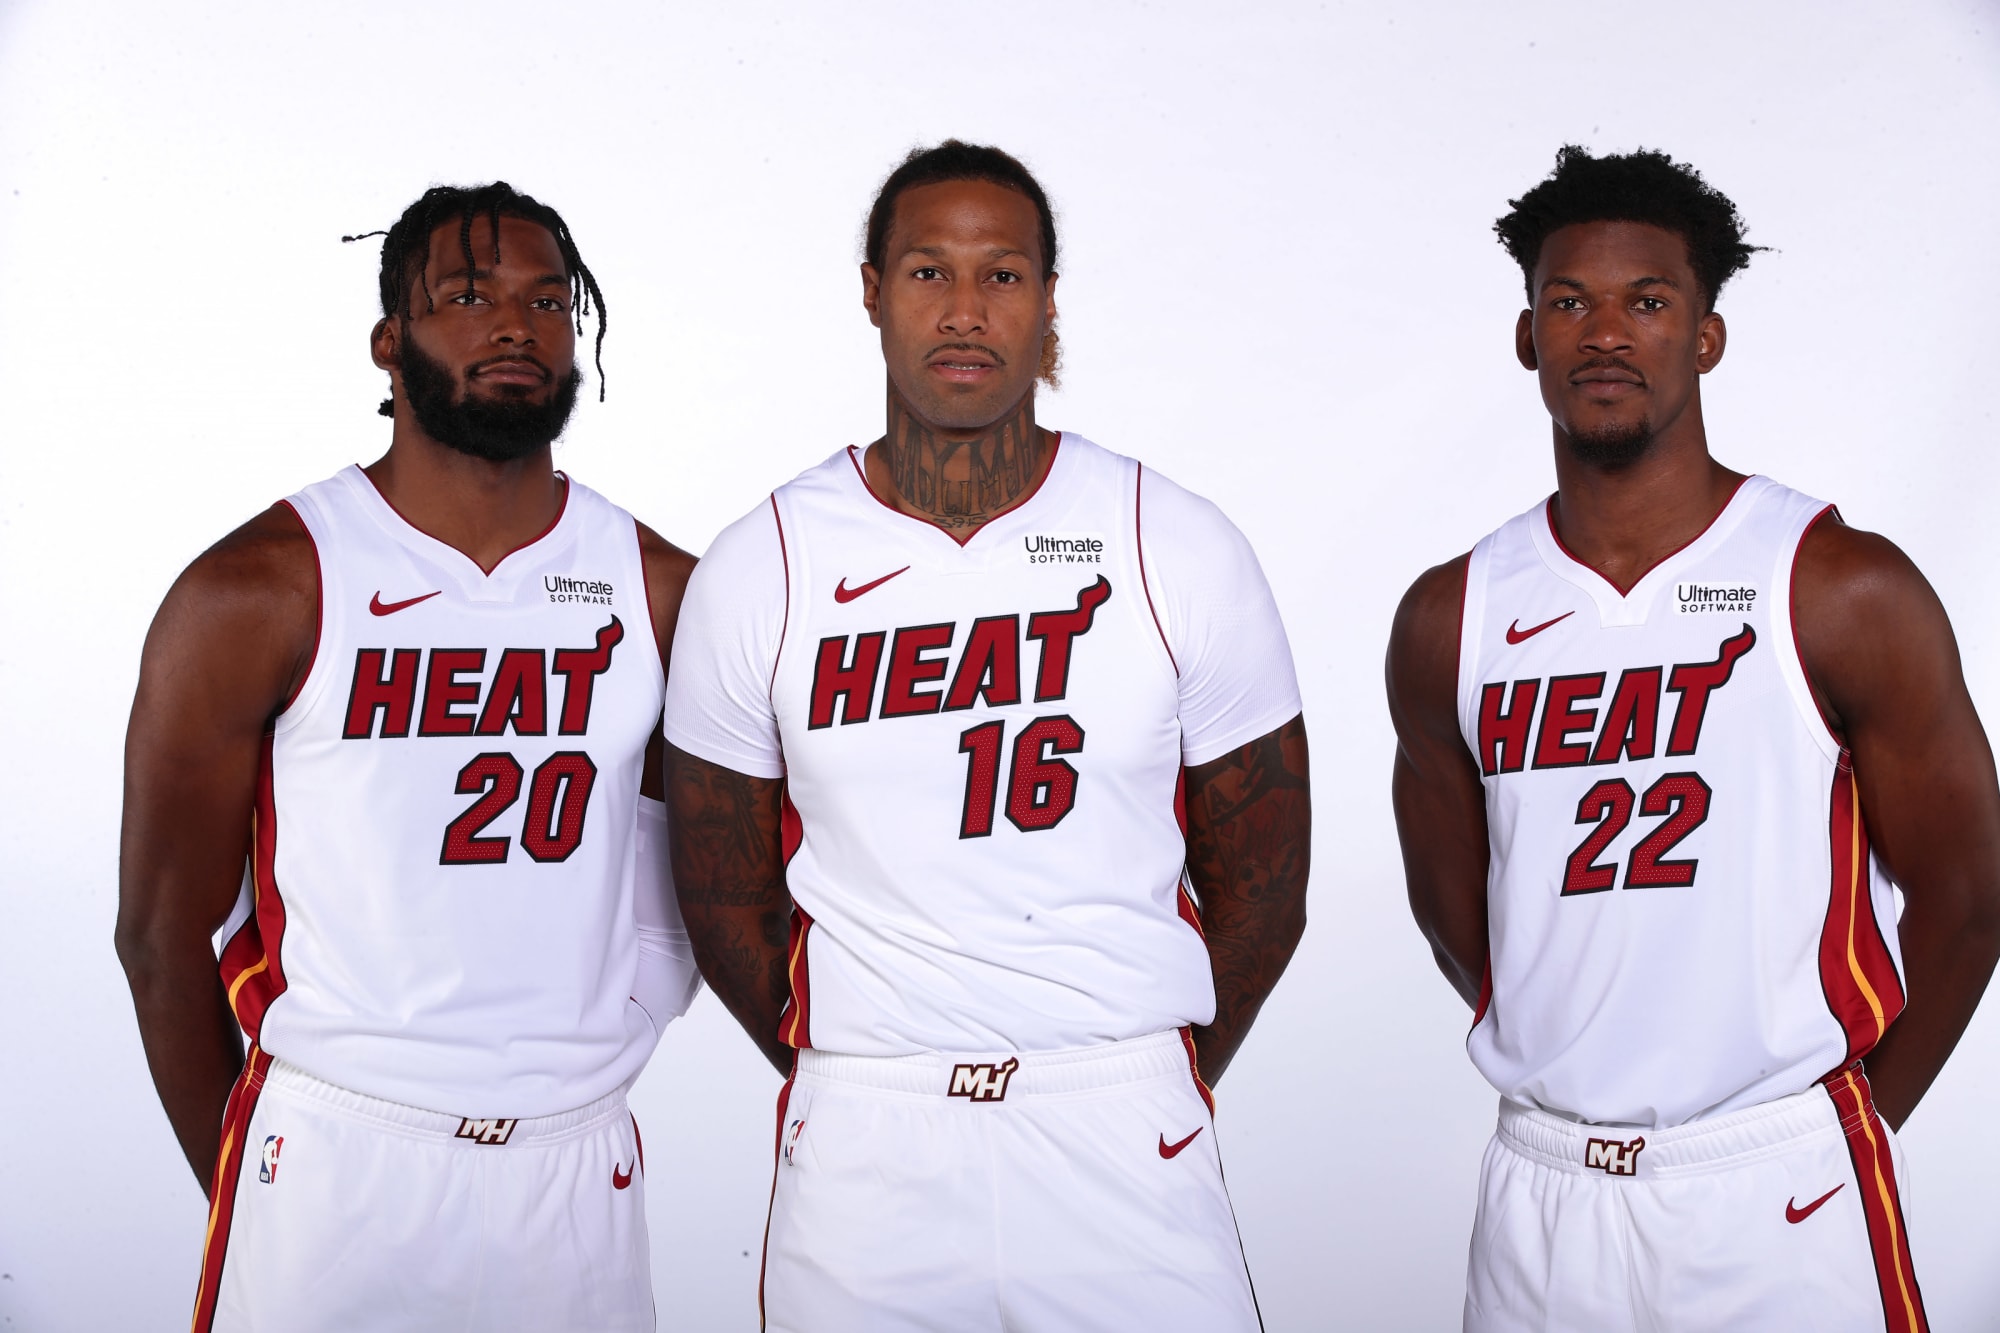 Miami Heat 3 players most likely to mix it up when called for Flipboard